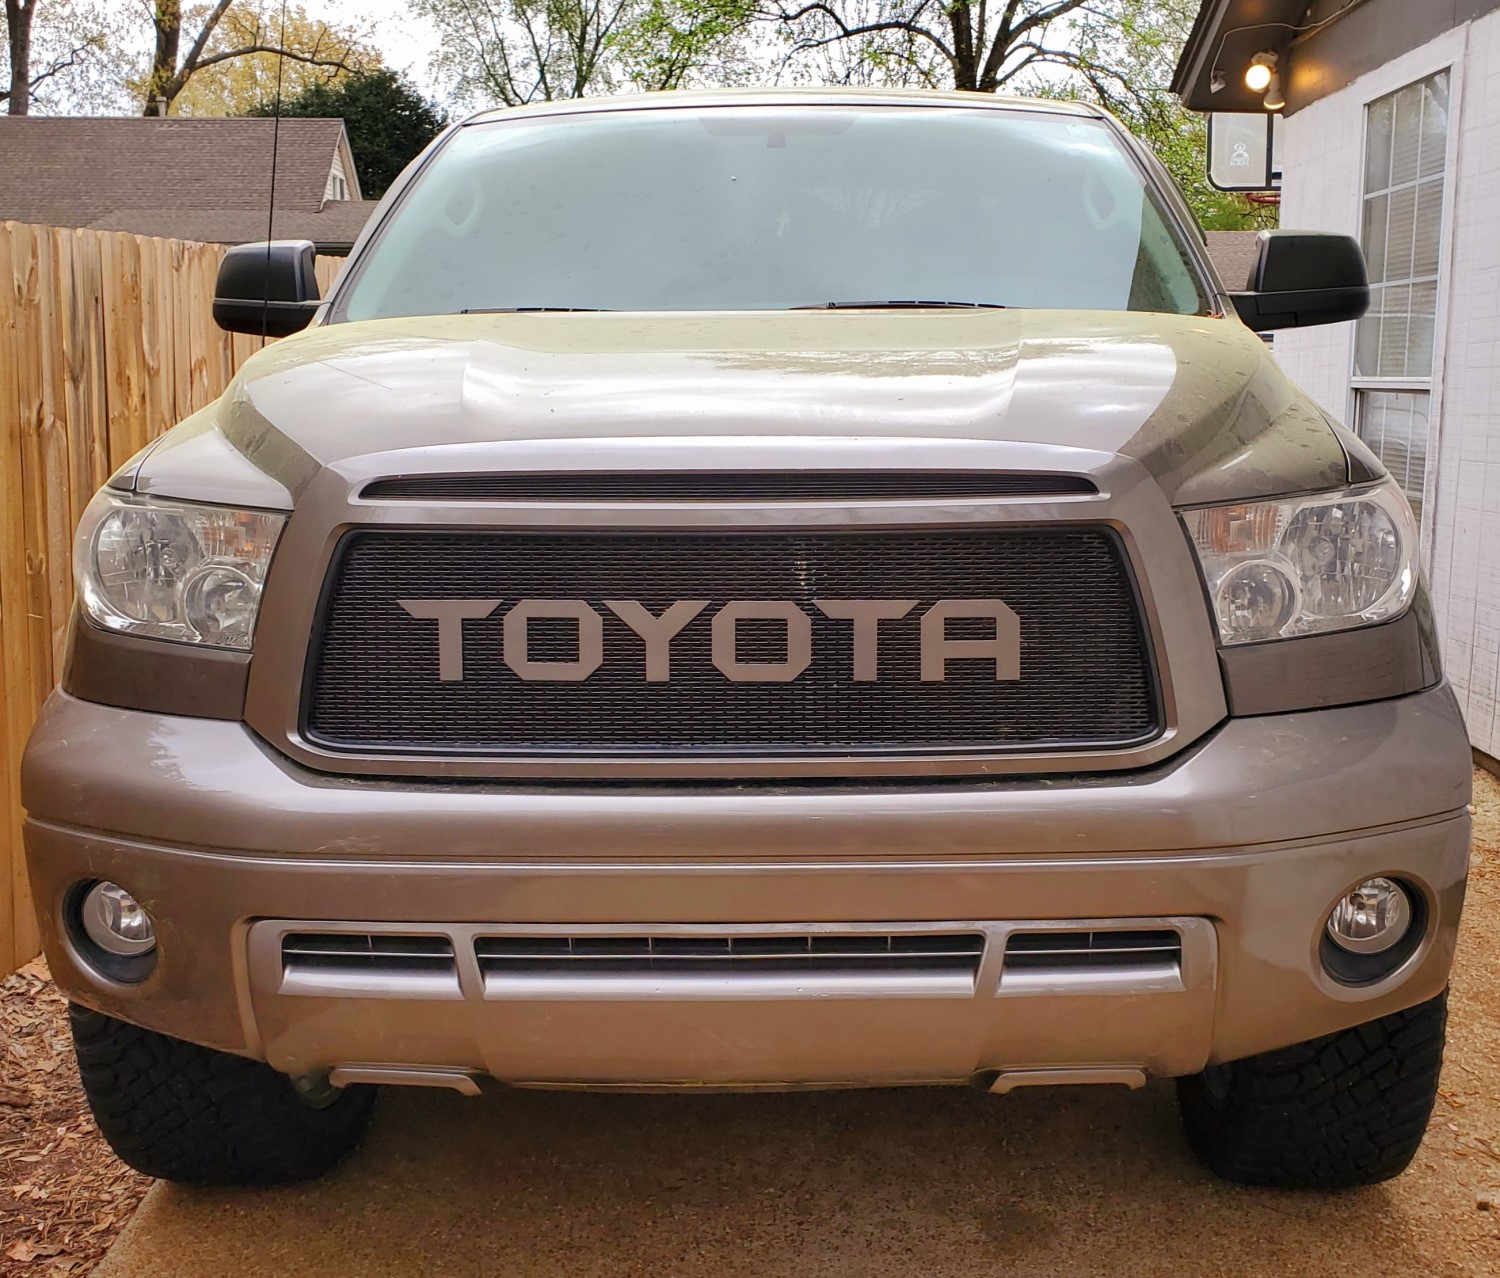 2010-13 Toyota Tundra Grill Mesh with Big Letters #4